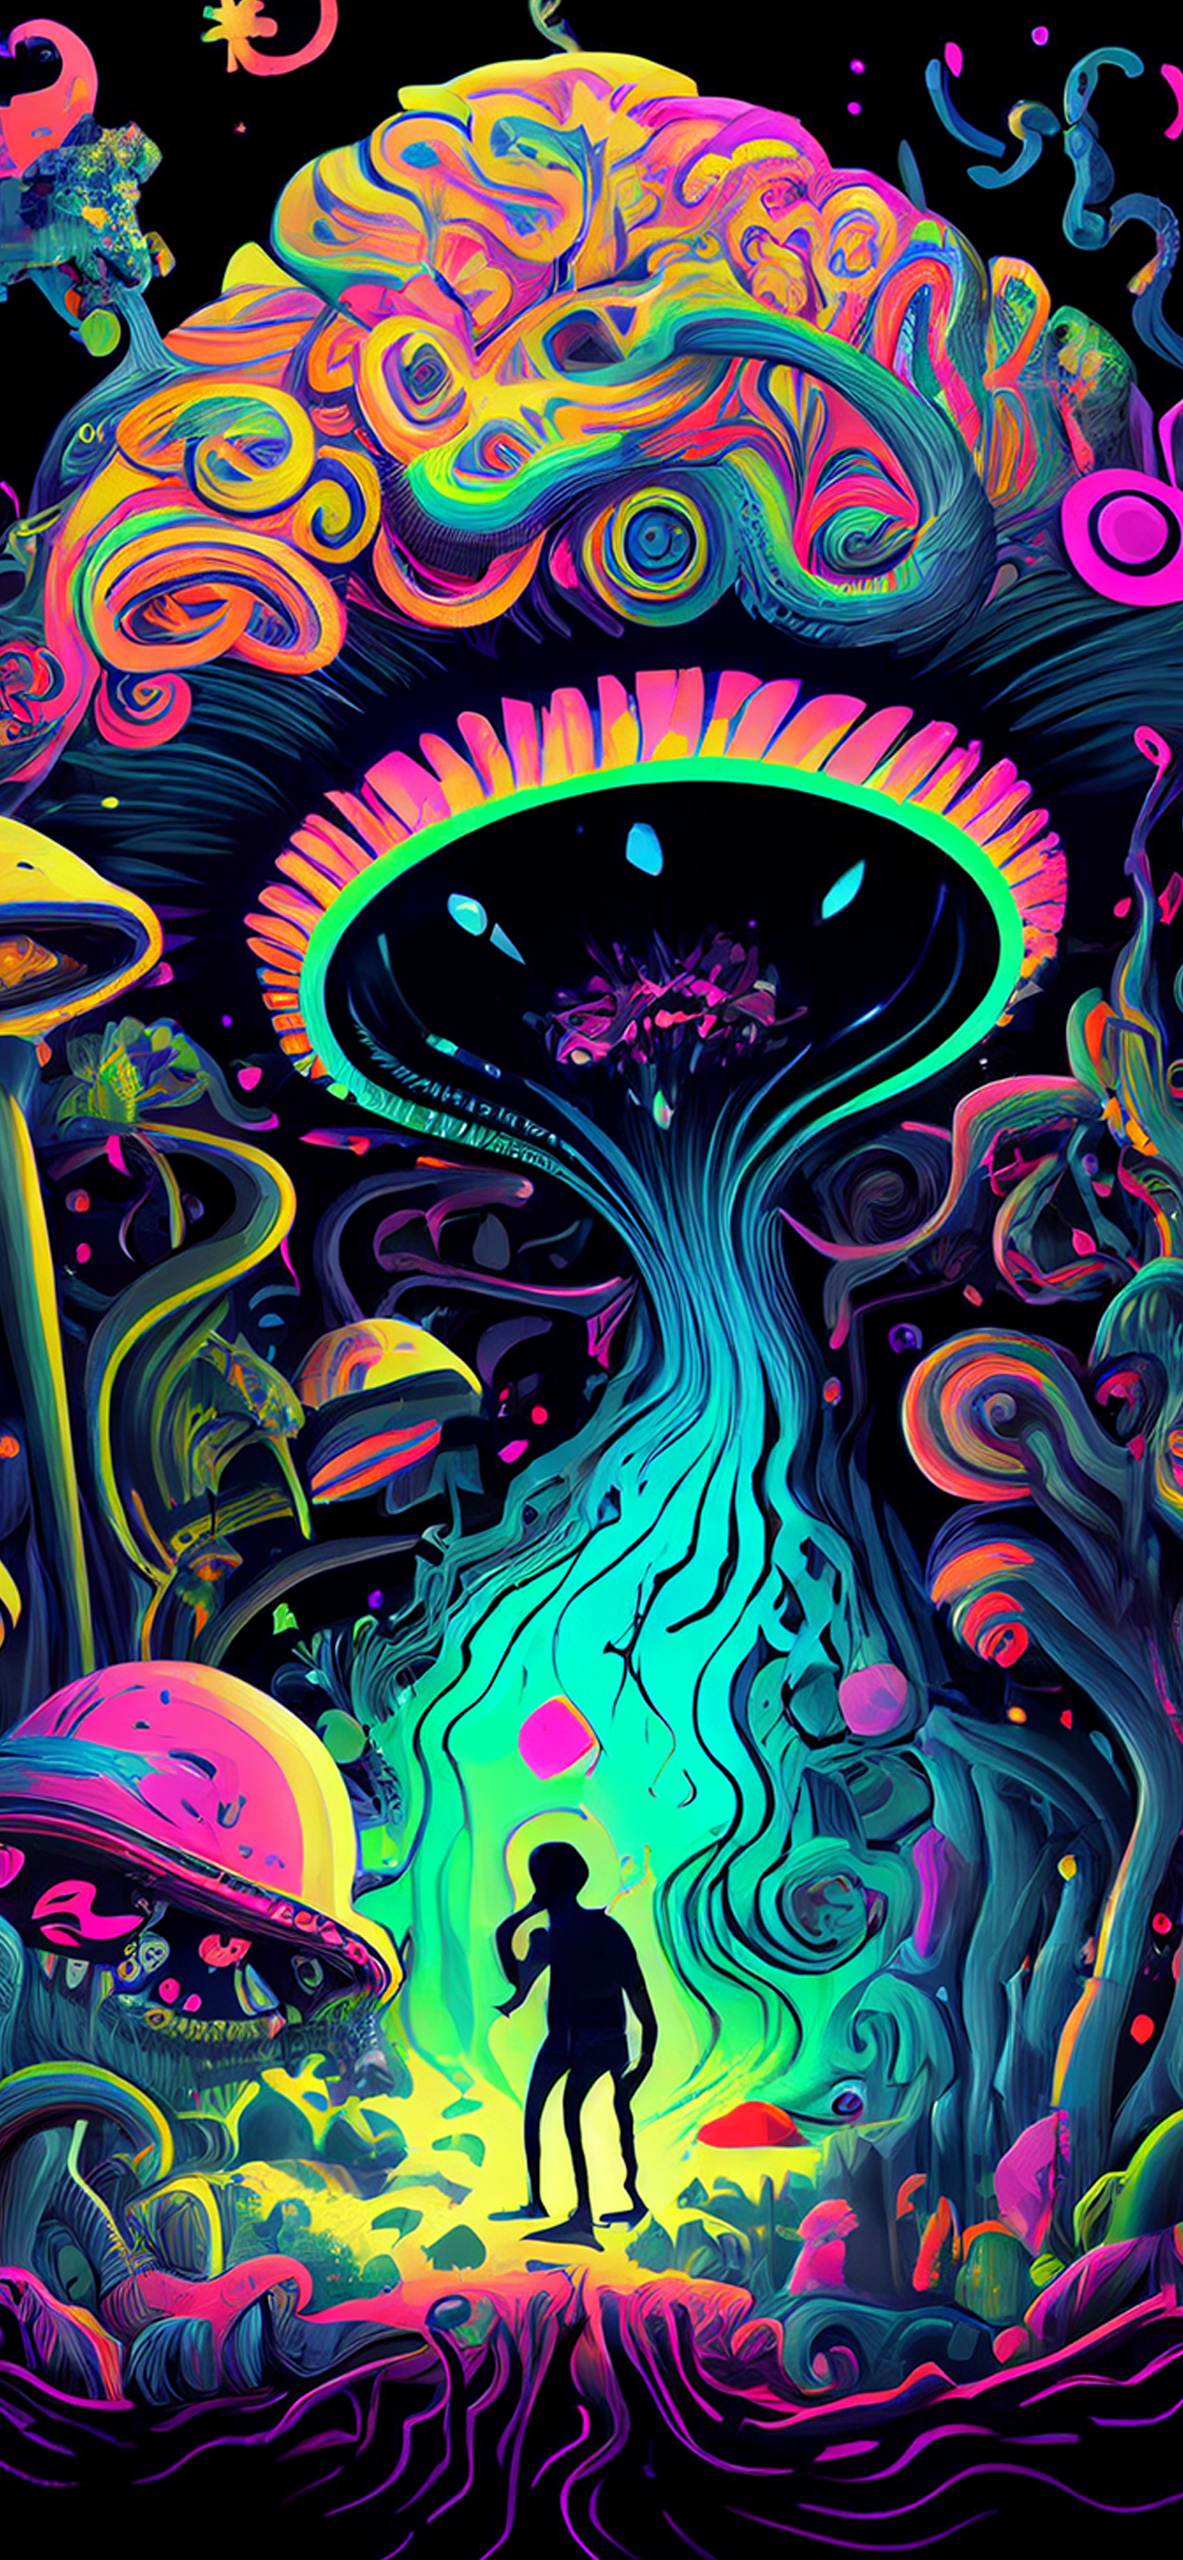 Trippy Aesthetic Wallpaper - Aesthetic Trippy Wallpapers for iPhone